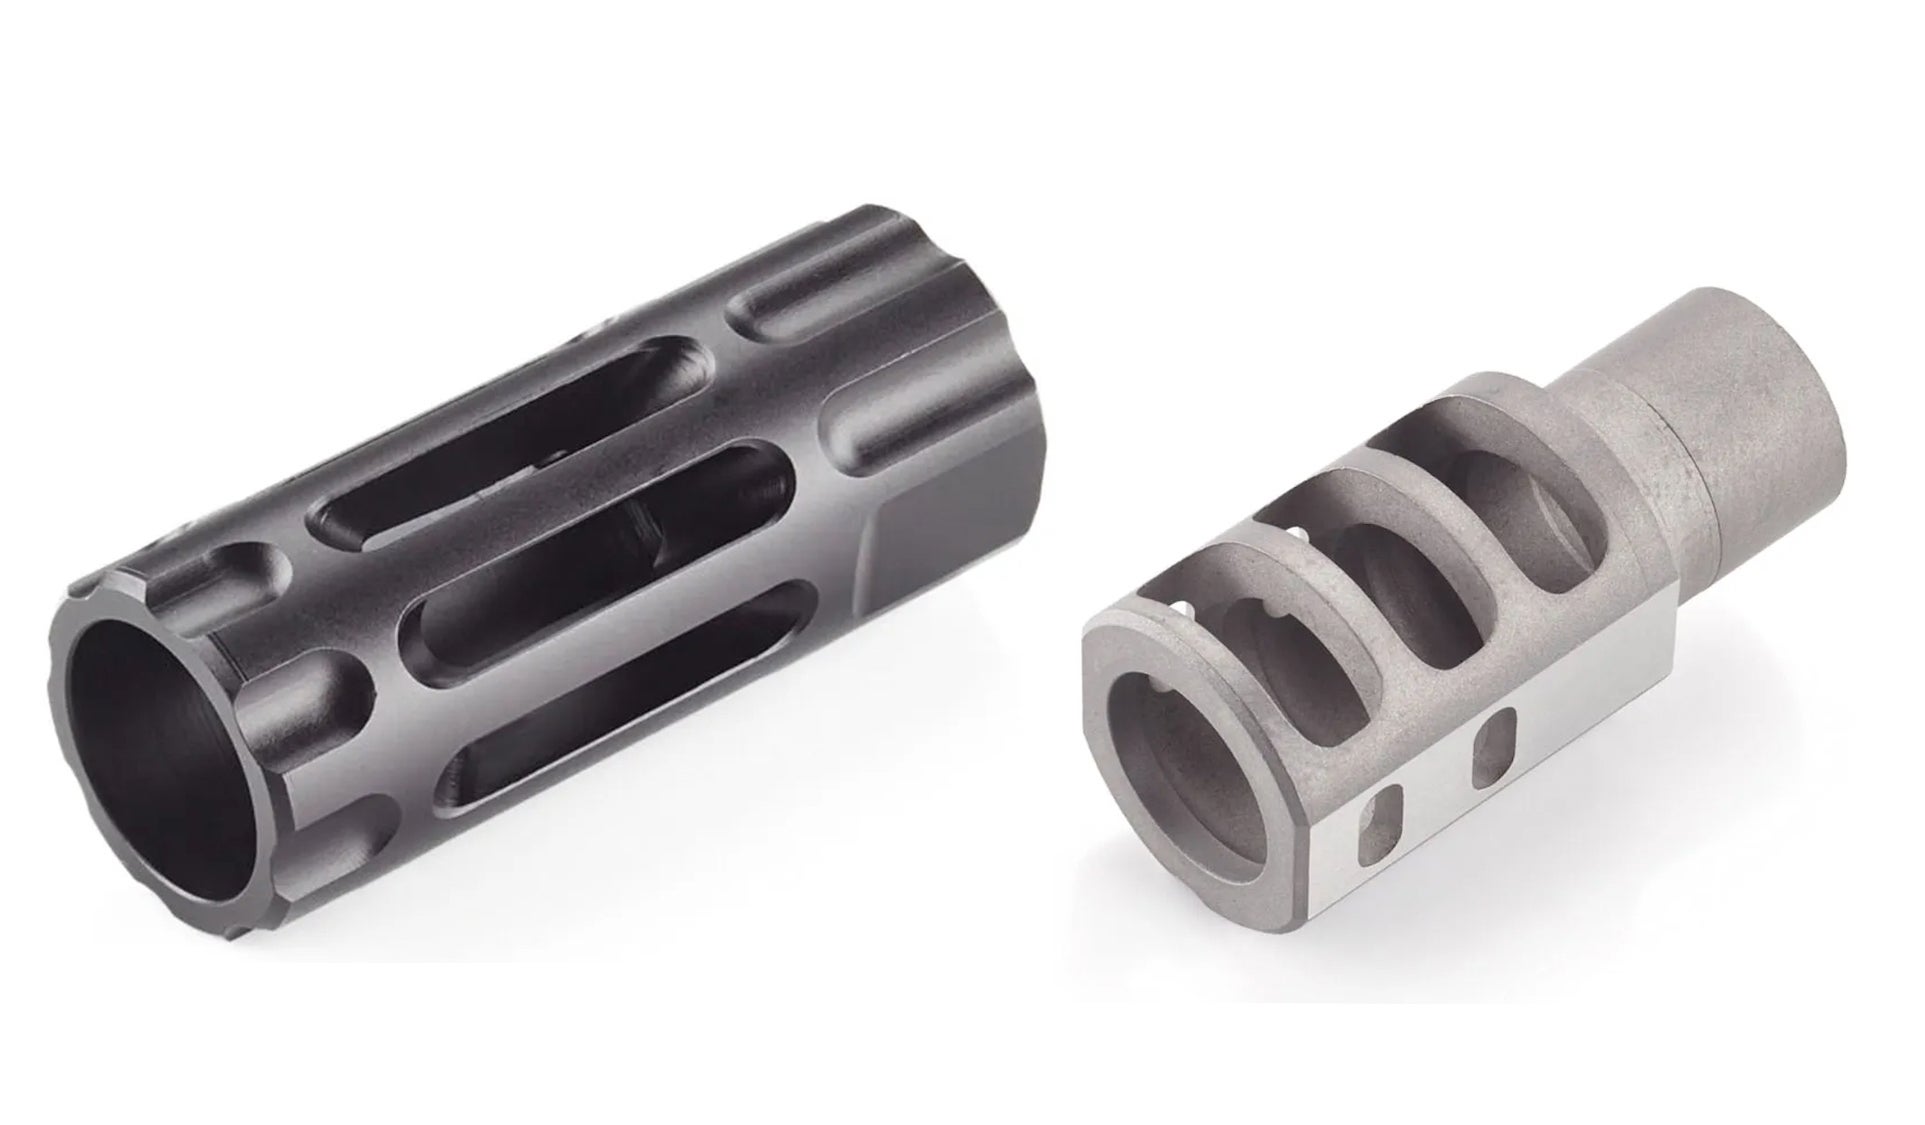 a photo of a muzzle brake on the left and compensator on the right